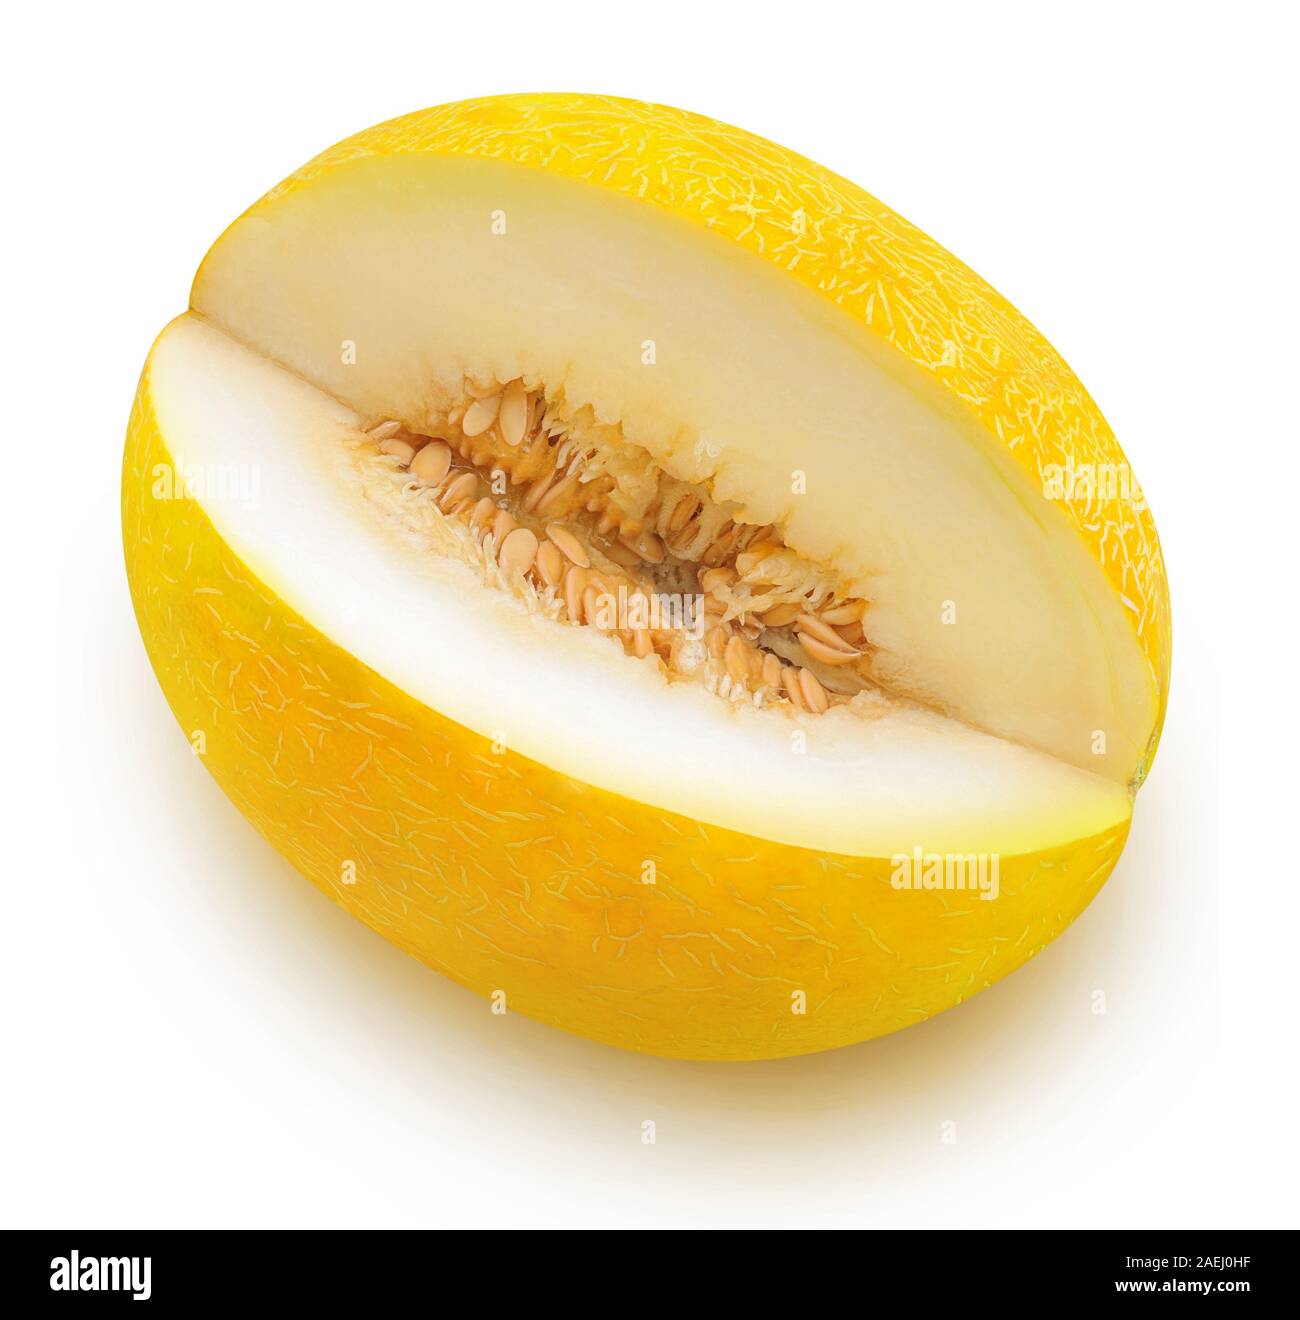 Isolated melon. Yellow melon fruit with cut out slice isolated on white background with clipping path, high angle view Stock Photo